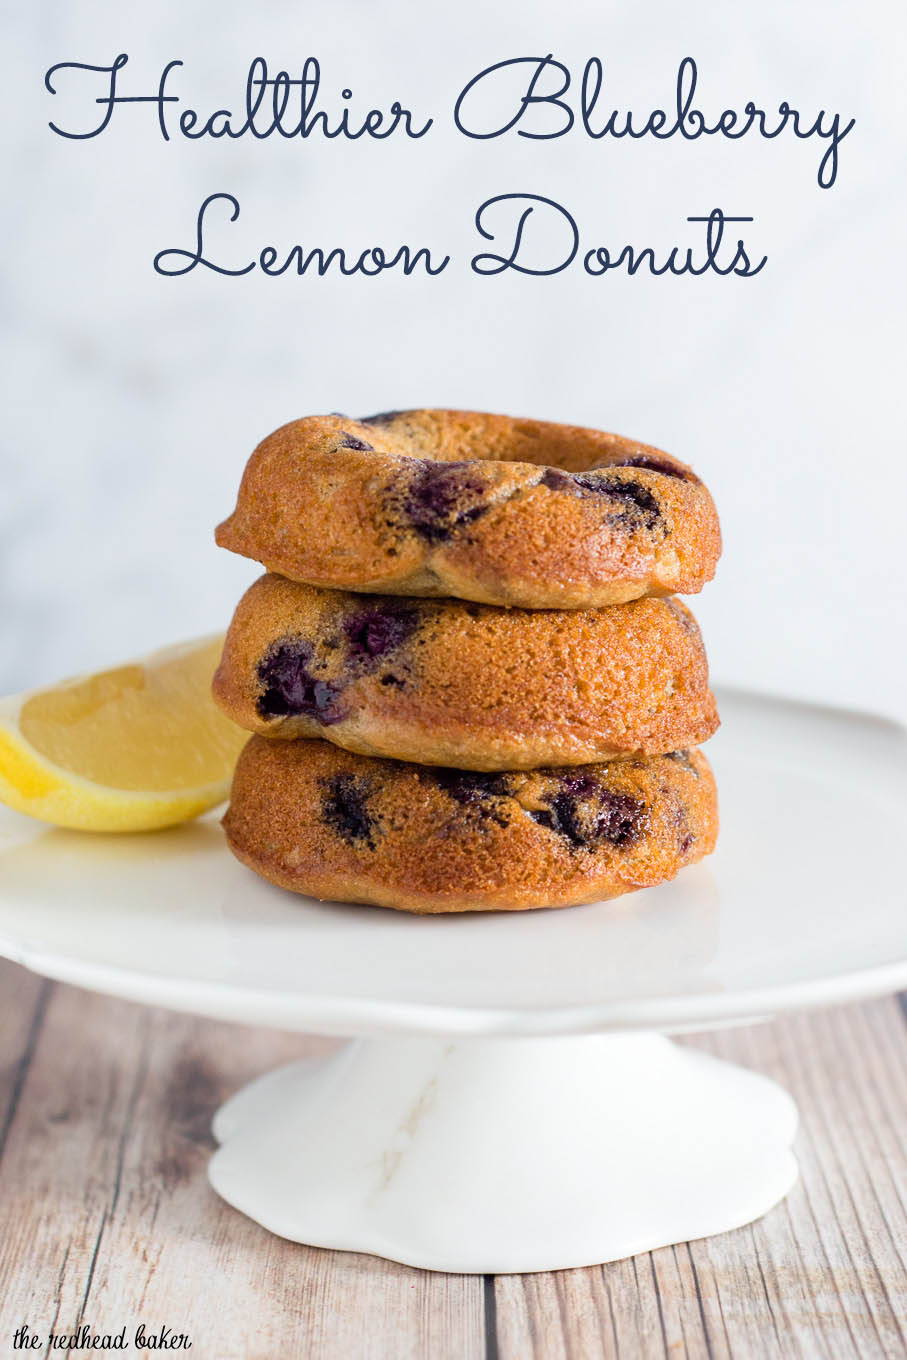 A new year often brings a resolution of eating healthier. I lightened up these blueberry lemon donuts so you can snack guilt-free!